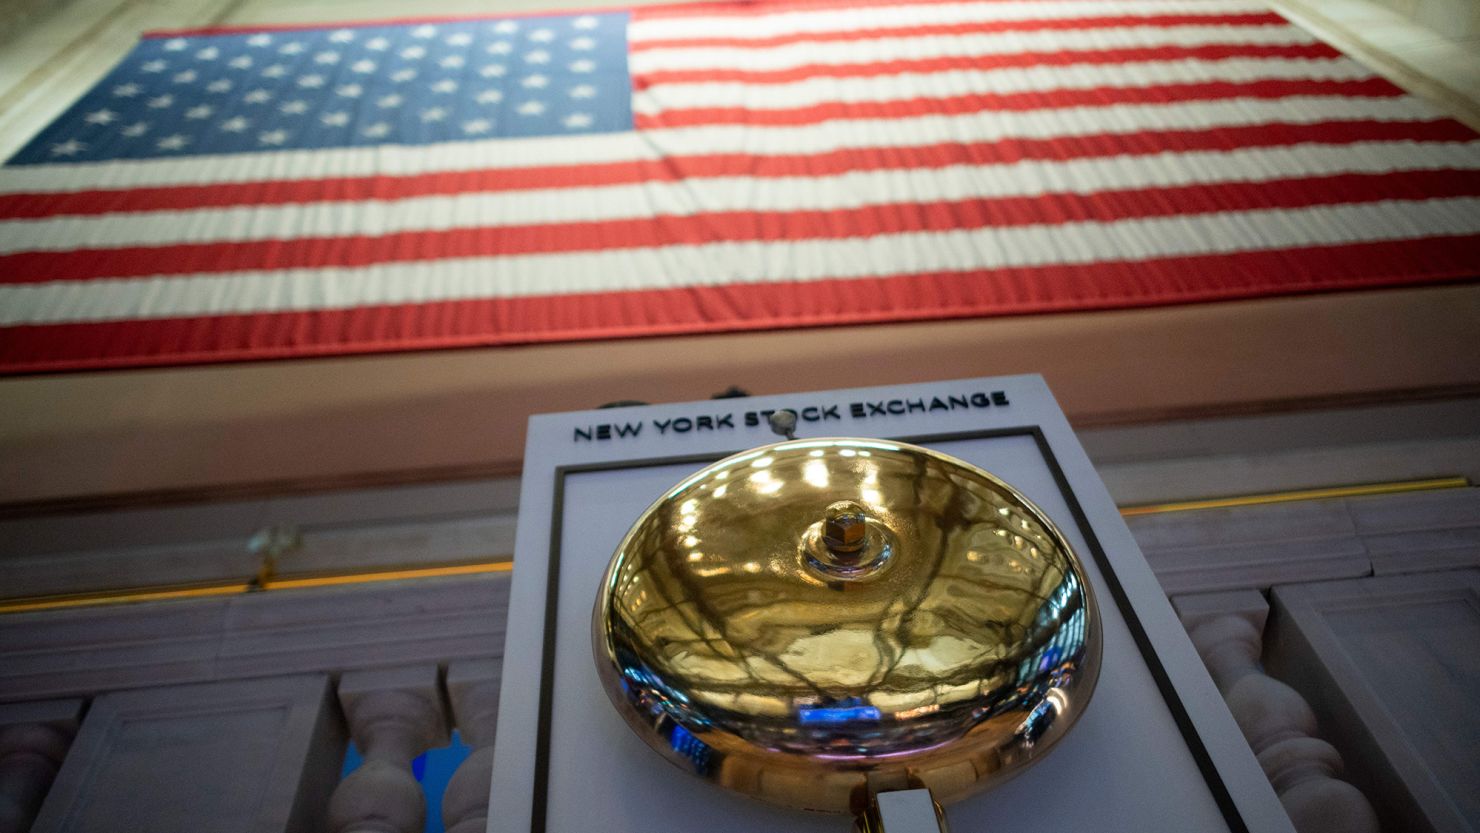 The bell is pictured at the New York Stock Exchange (NYSE) on August 5, 2019, at Wall Street in New York City.